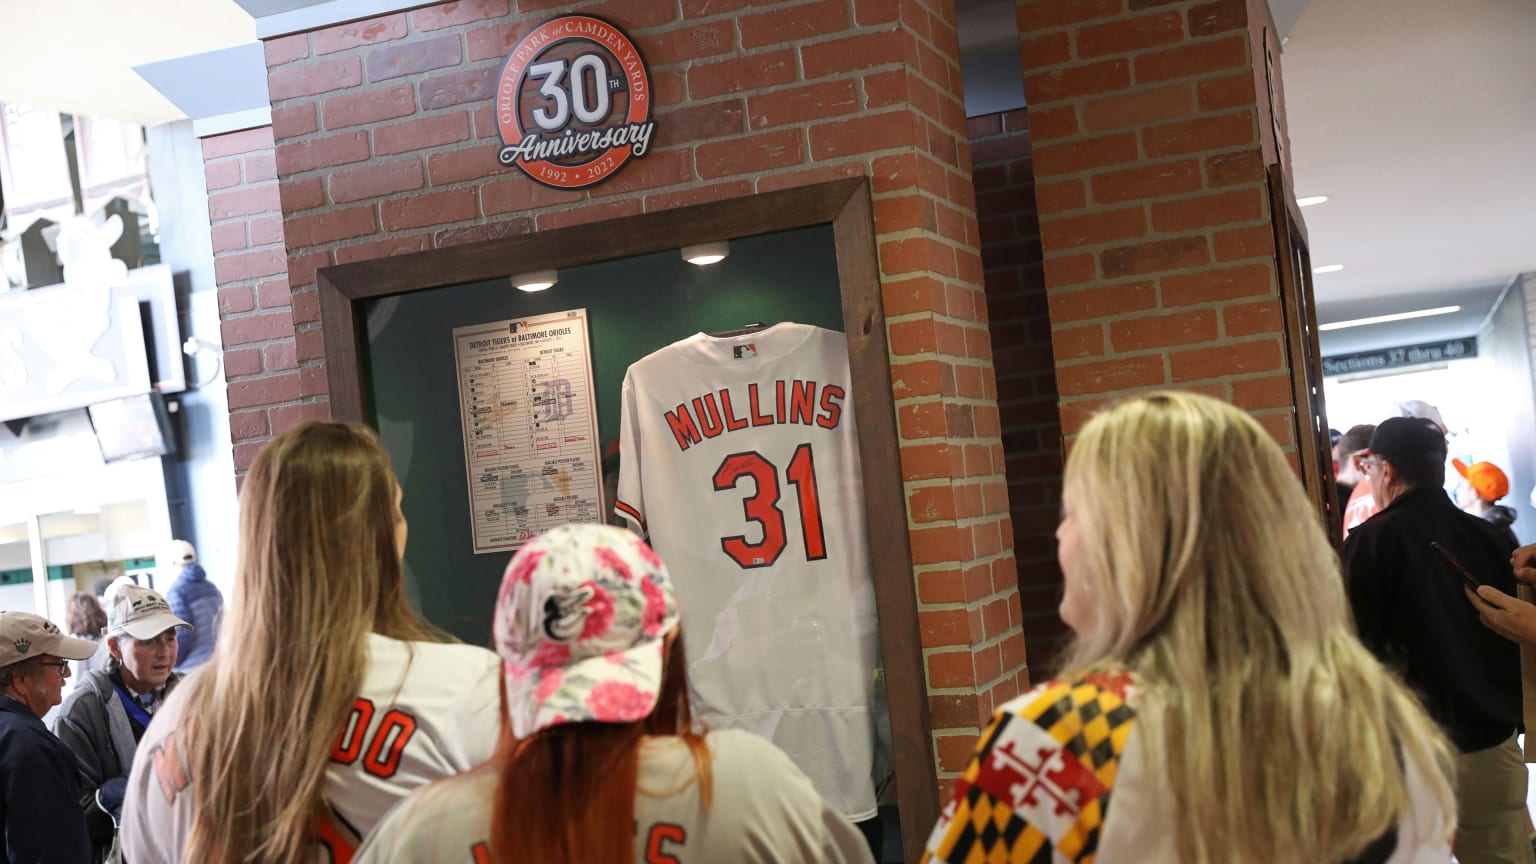 Oriole Park at 30: Lots of memories - Ballpark Digest